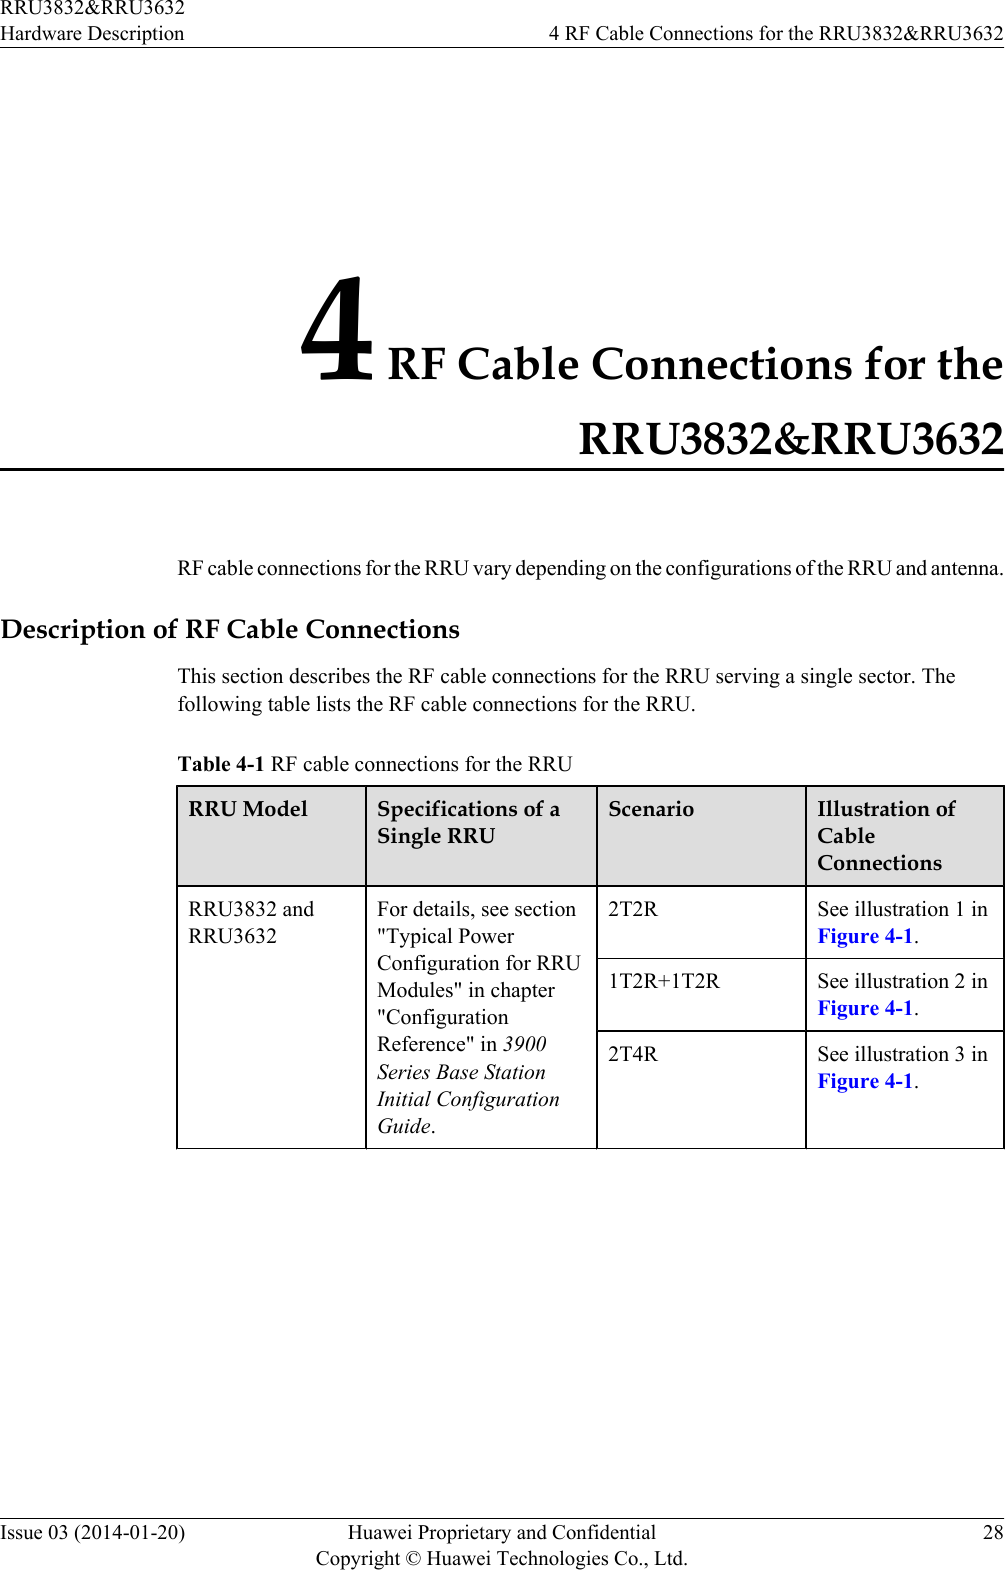 4 RF Cable Connections for theRRU3832&amp;RRU3632RF cable connections for the RRU vary depending on the configurations of the RRU and antenna.Description of RF Cable ConnectionsThis section describes the RF cable connections for the RRU serving a single sector. Thefollowing table lists the RF cable connections for the RRU.Table 4-1 RF cable connections for the RRURRU Model Specifications of aSingle RRUScenario Illustration ofCableConnectionsRRU3832 andRRU3632For details, see section&quot;Typical PowerConfiguration for RRUModules&quot; in chapter&quot;ConfigurationReference&quot; in 3900Series Base StationInitial ConfigurationGuide.2T2R See illustration 1 inFigure 4-1.1T2R+1T2R See illustration 2 inFigure 4-1.2T4R See illustration 3 inFigure 4-1. RRU3832&amp;RRU3632Hardware Description 4 RF Cable Connections for the RRU3832&amp;RRU3632Issue 03 (2014-01-20) Huawei Proprietary and ConfidentialCopyright © Huawei Technologies Co., Ltd.28